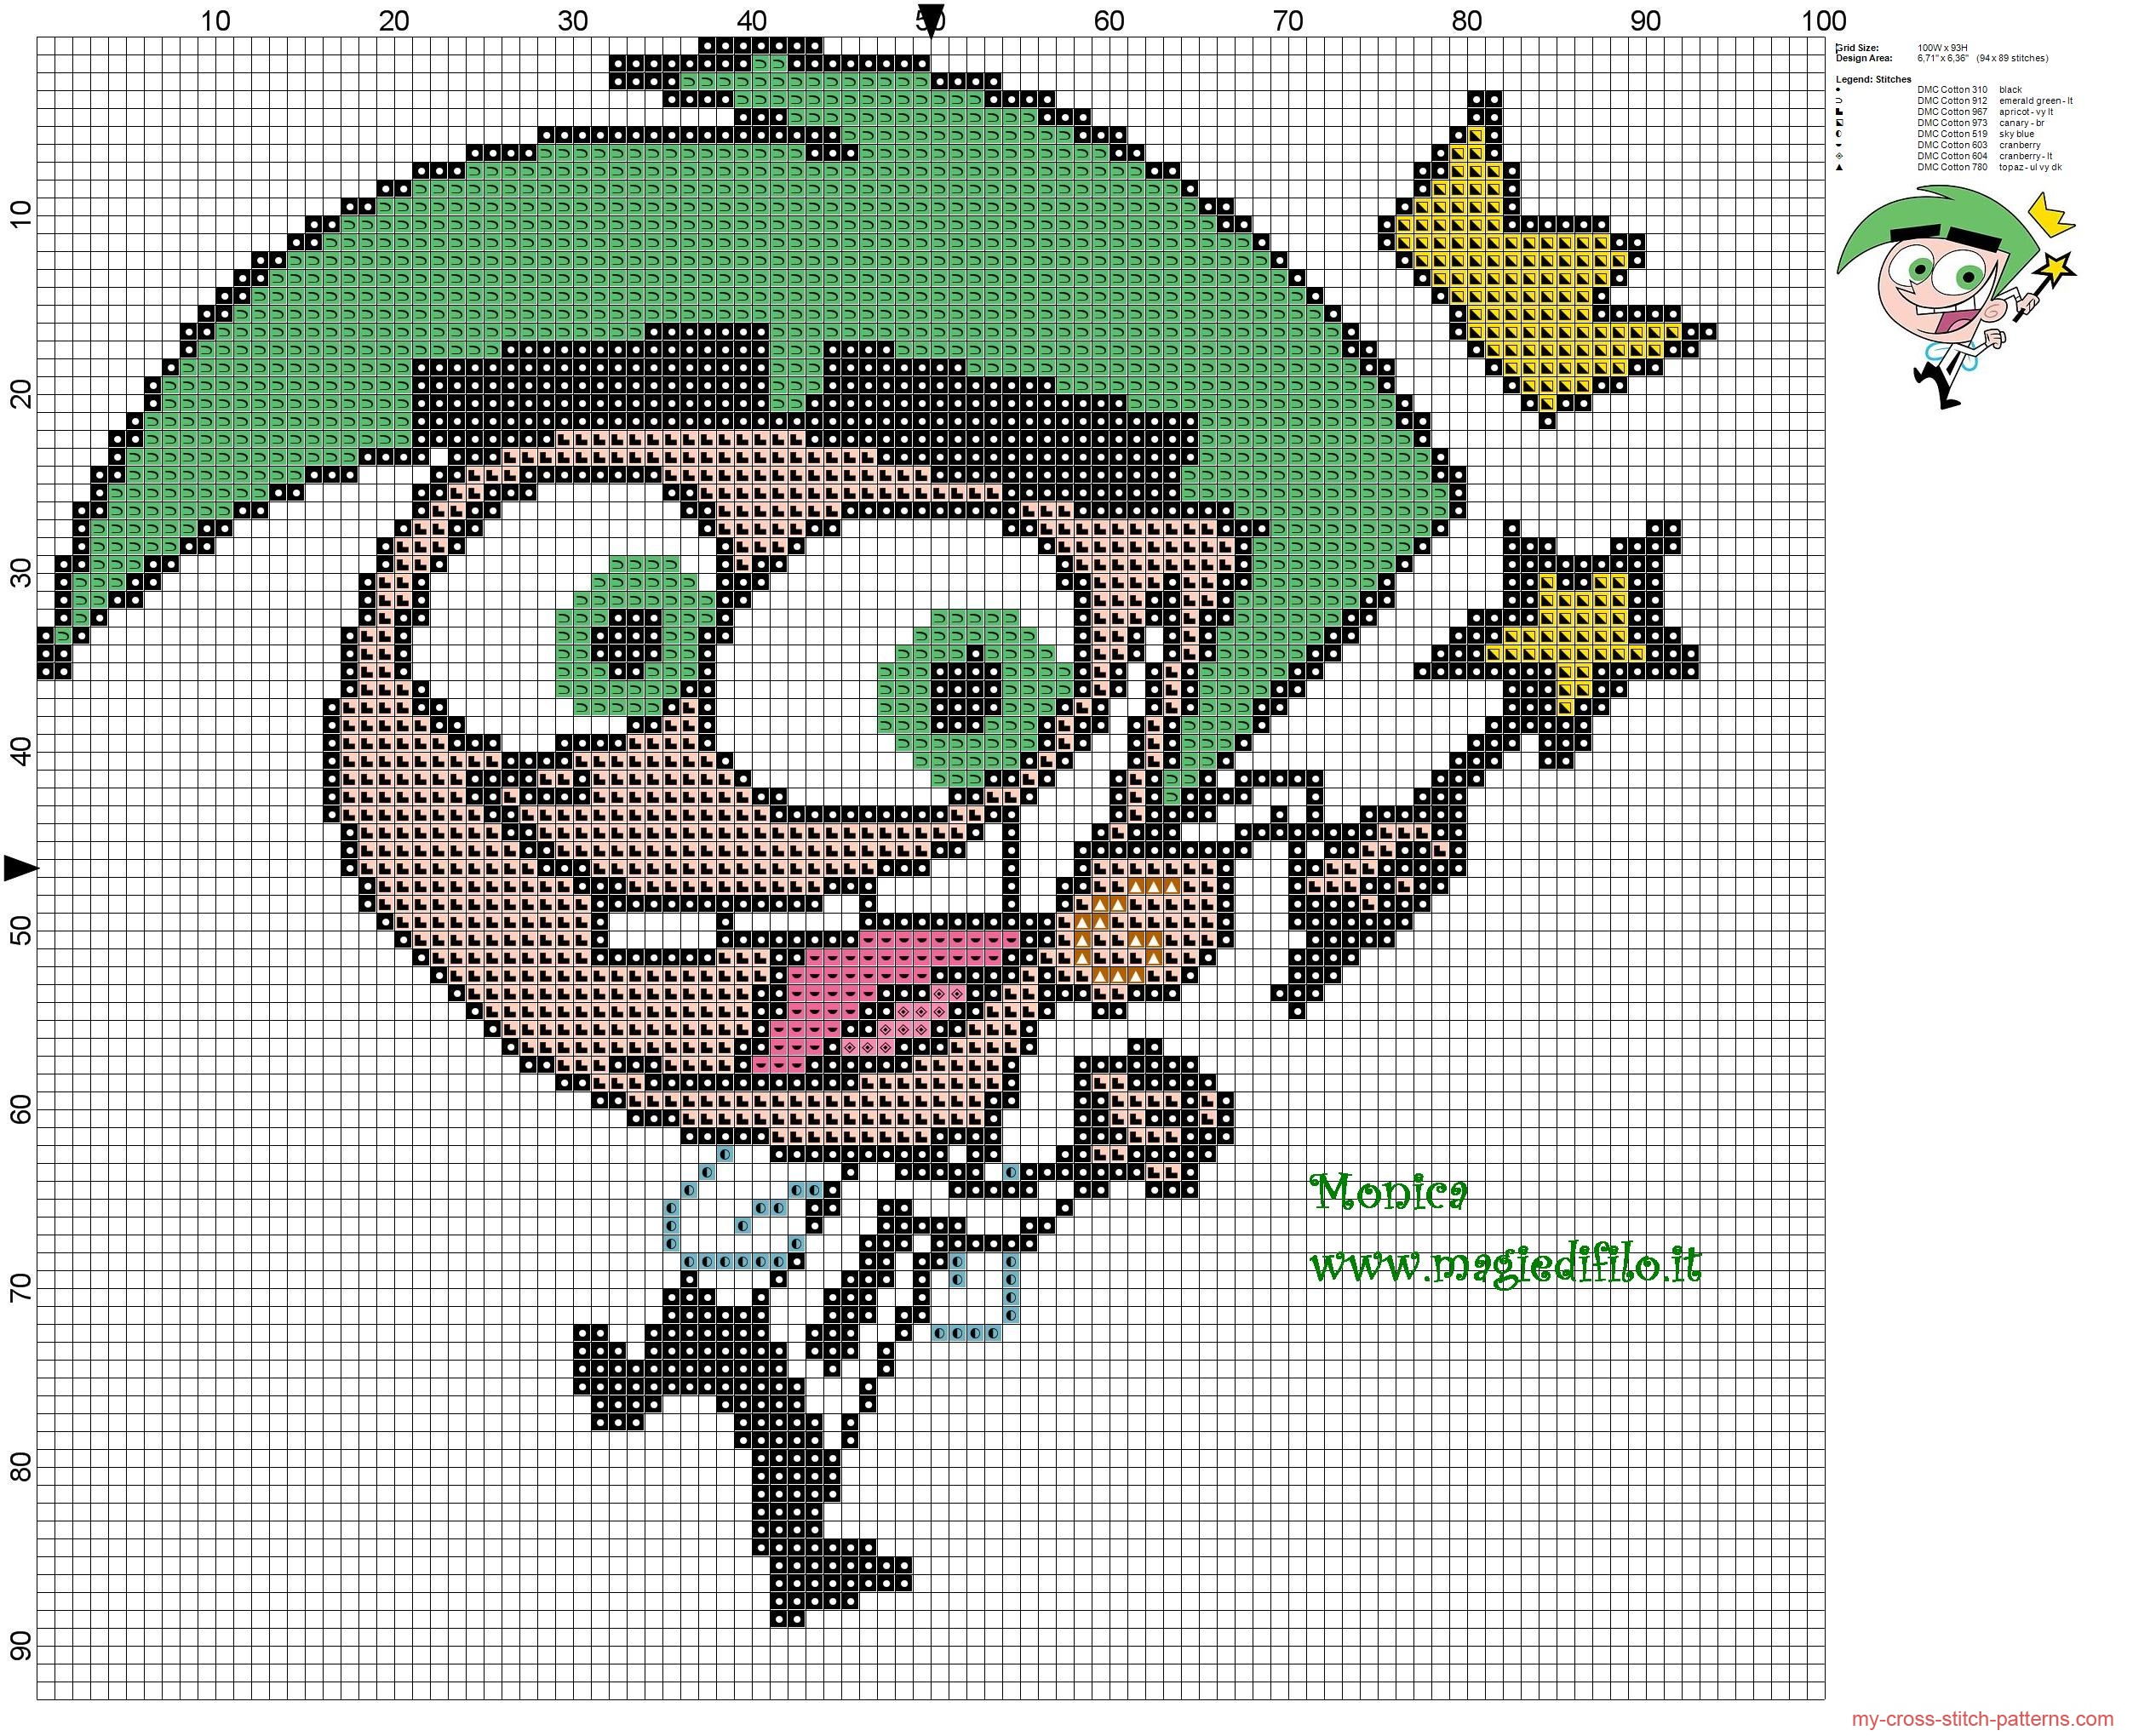 cosmo_the_fairly_oddparents_cross_stitch_pattern_